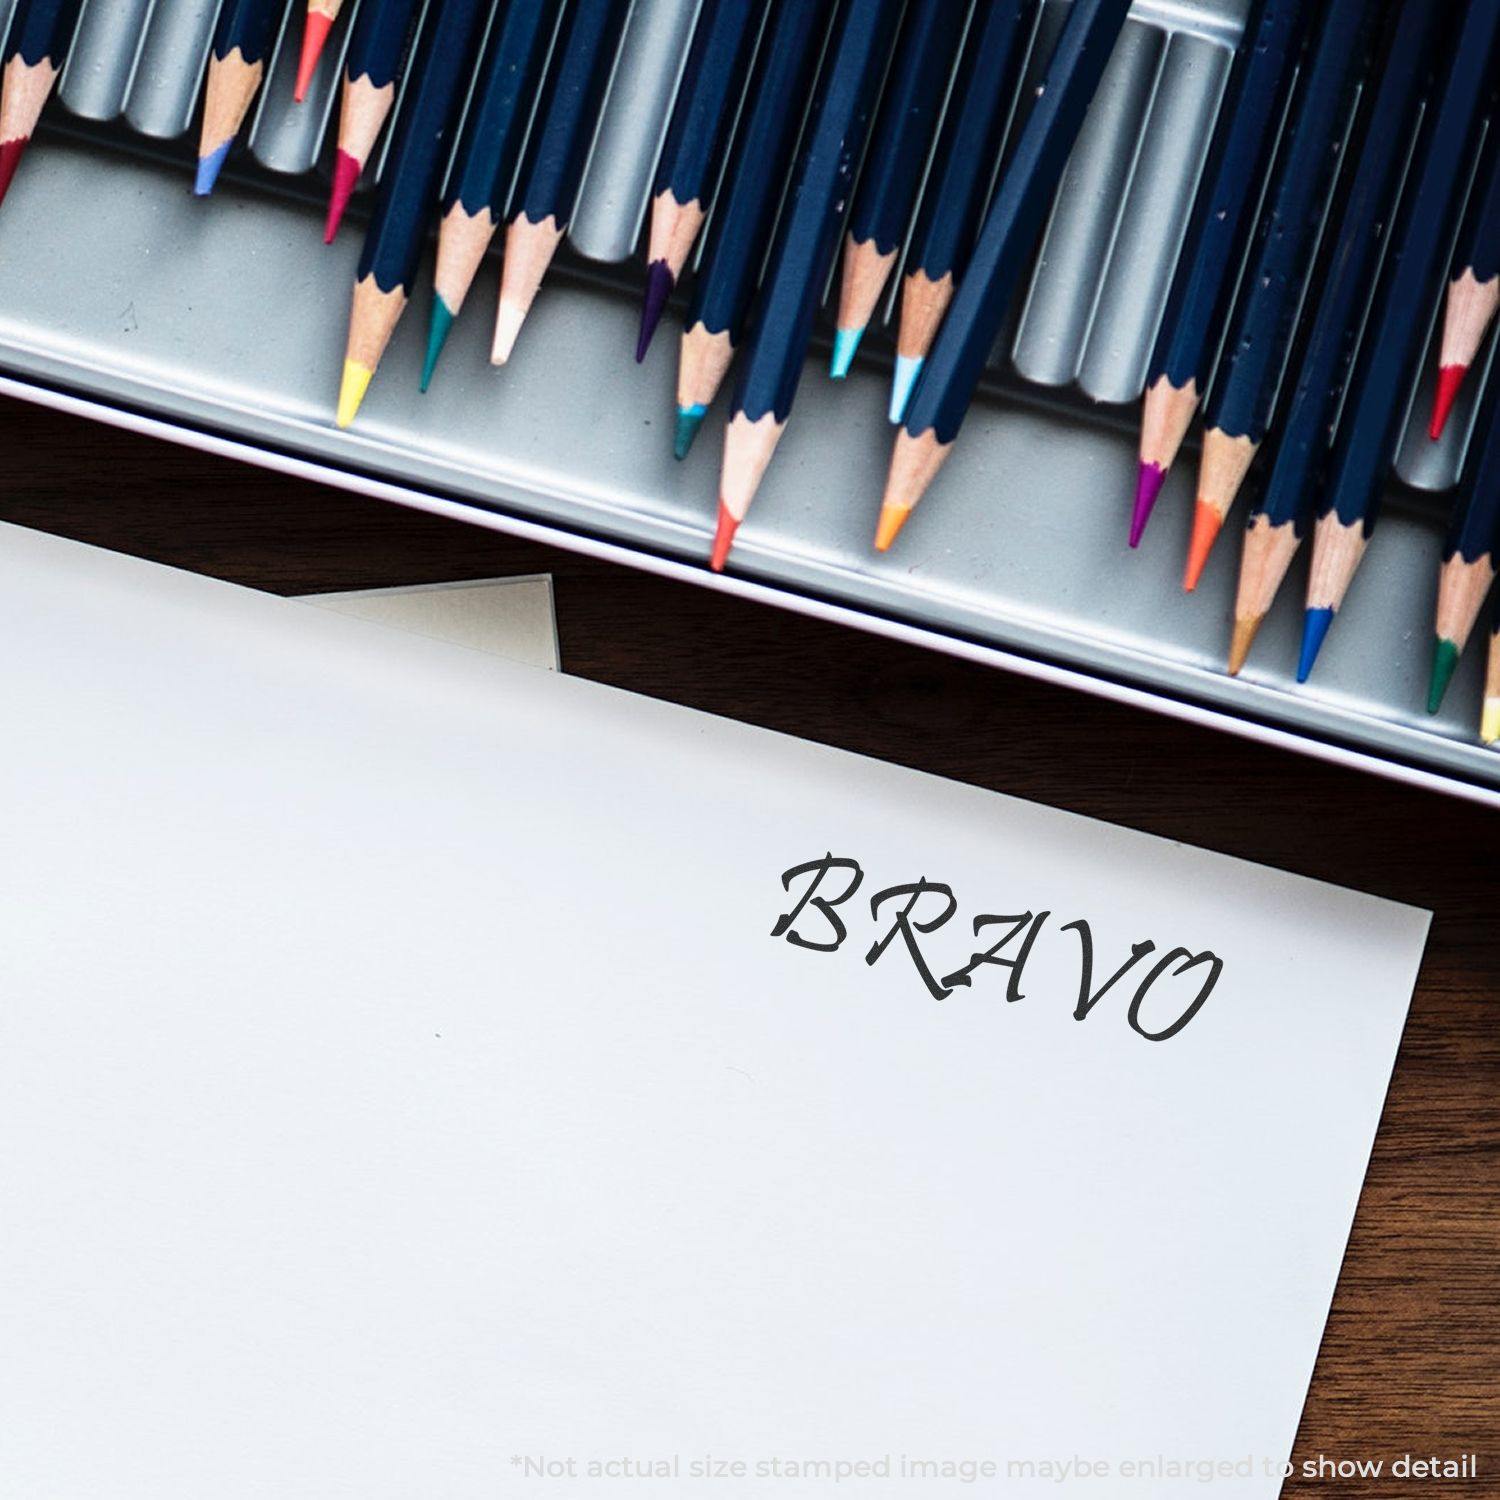 A self-inking stamp with a stamped image showing how the text "BRAVO" in a large bold font is displayed by it.